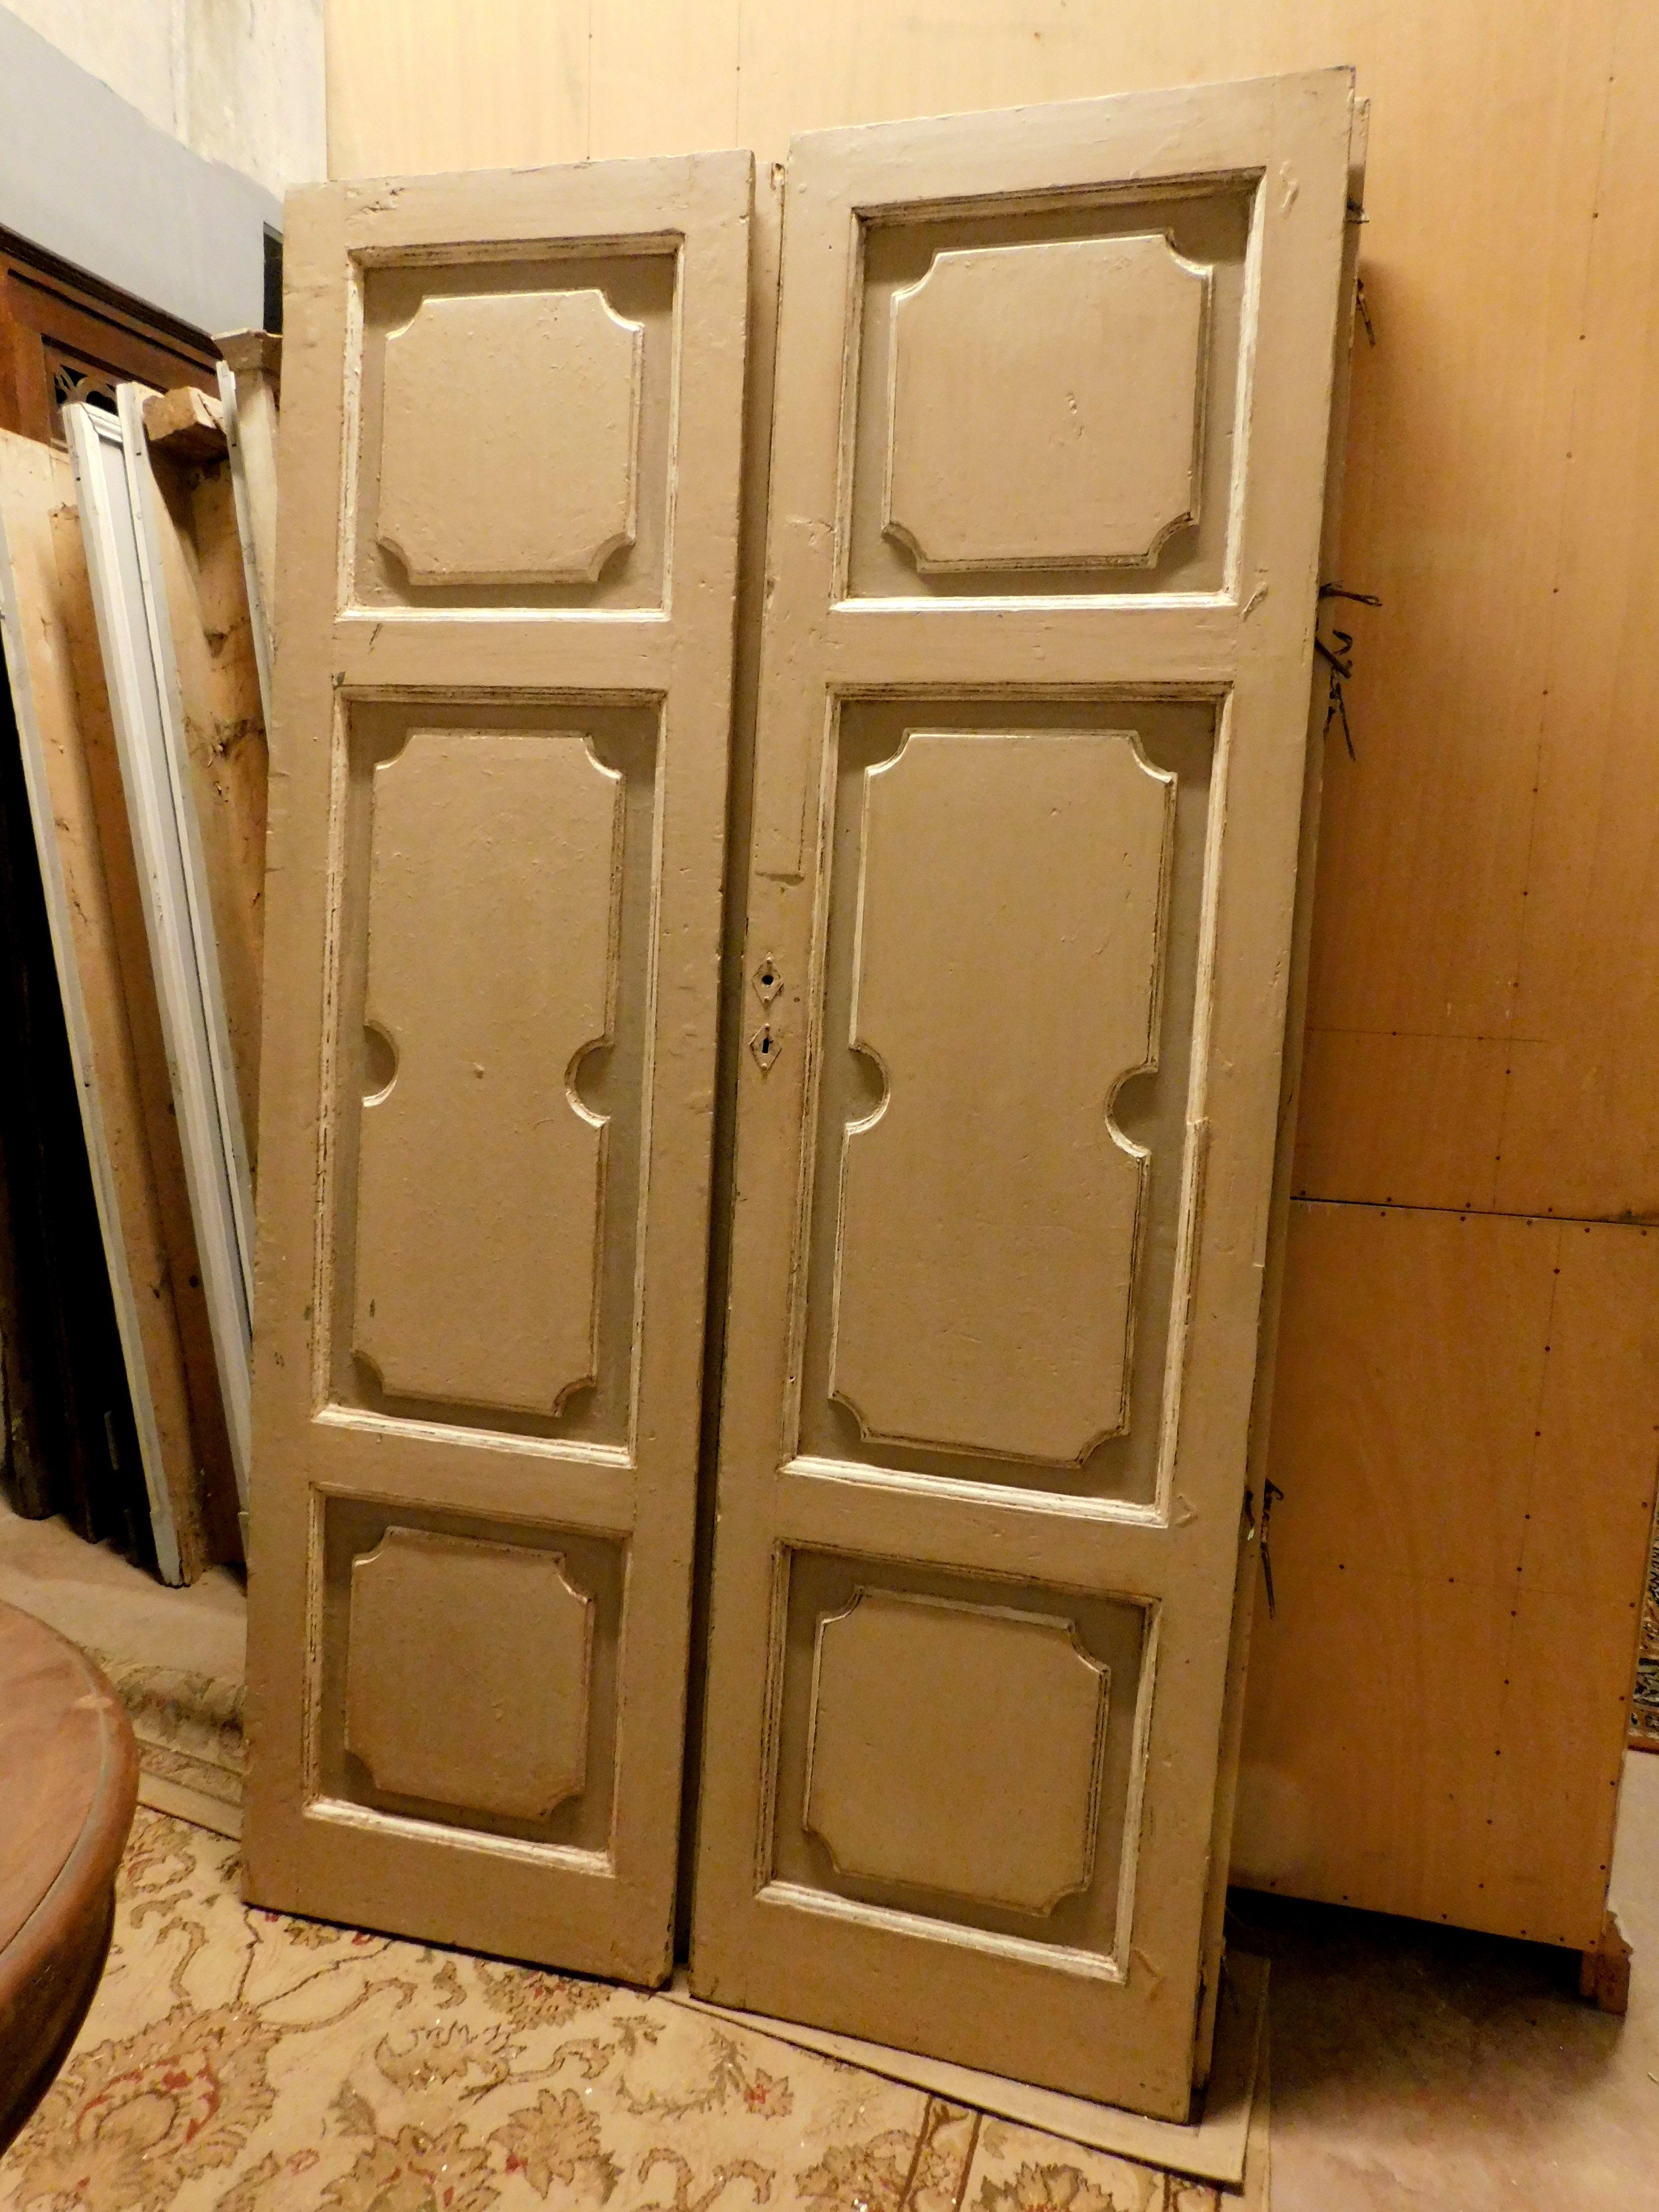 5 antique lacquered doors, all the same and with double leaf, without frame but exactly the same front and back, built in the 18th century, for a building in Italy. They all come from the same house and can also be easily adapted as furniture doors,